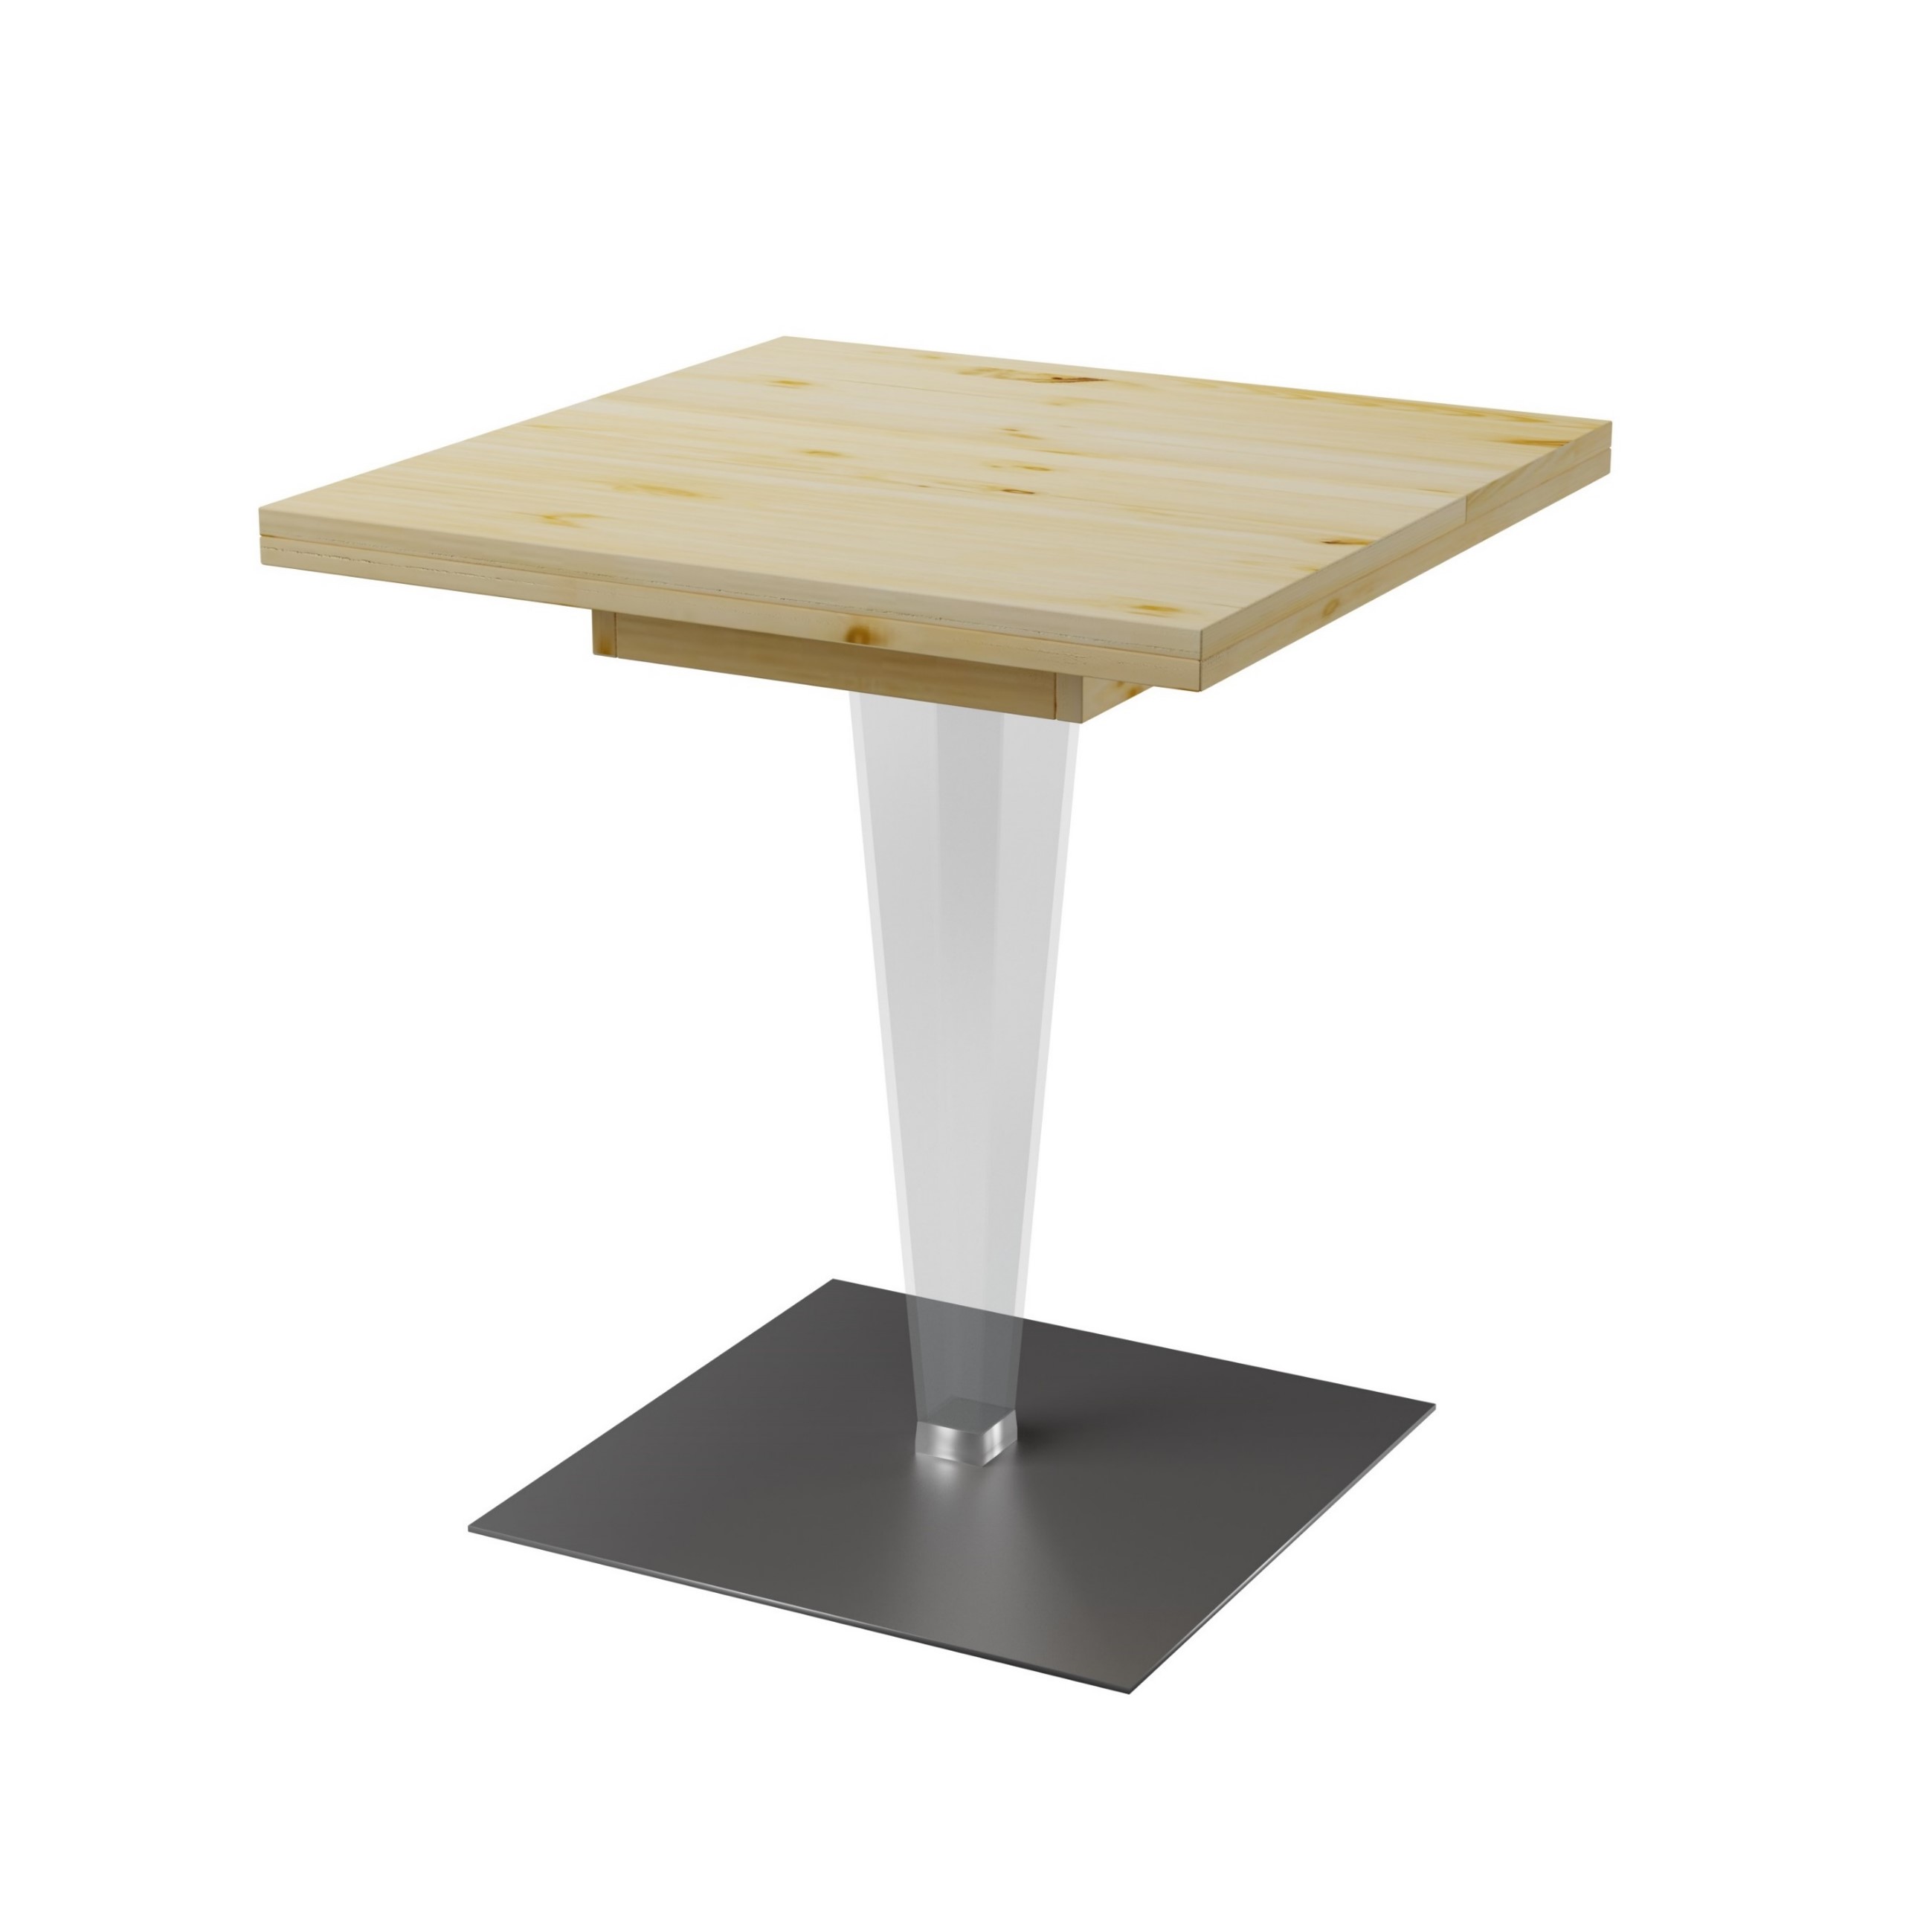 Table eco XS 70x70 - pied tansparent